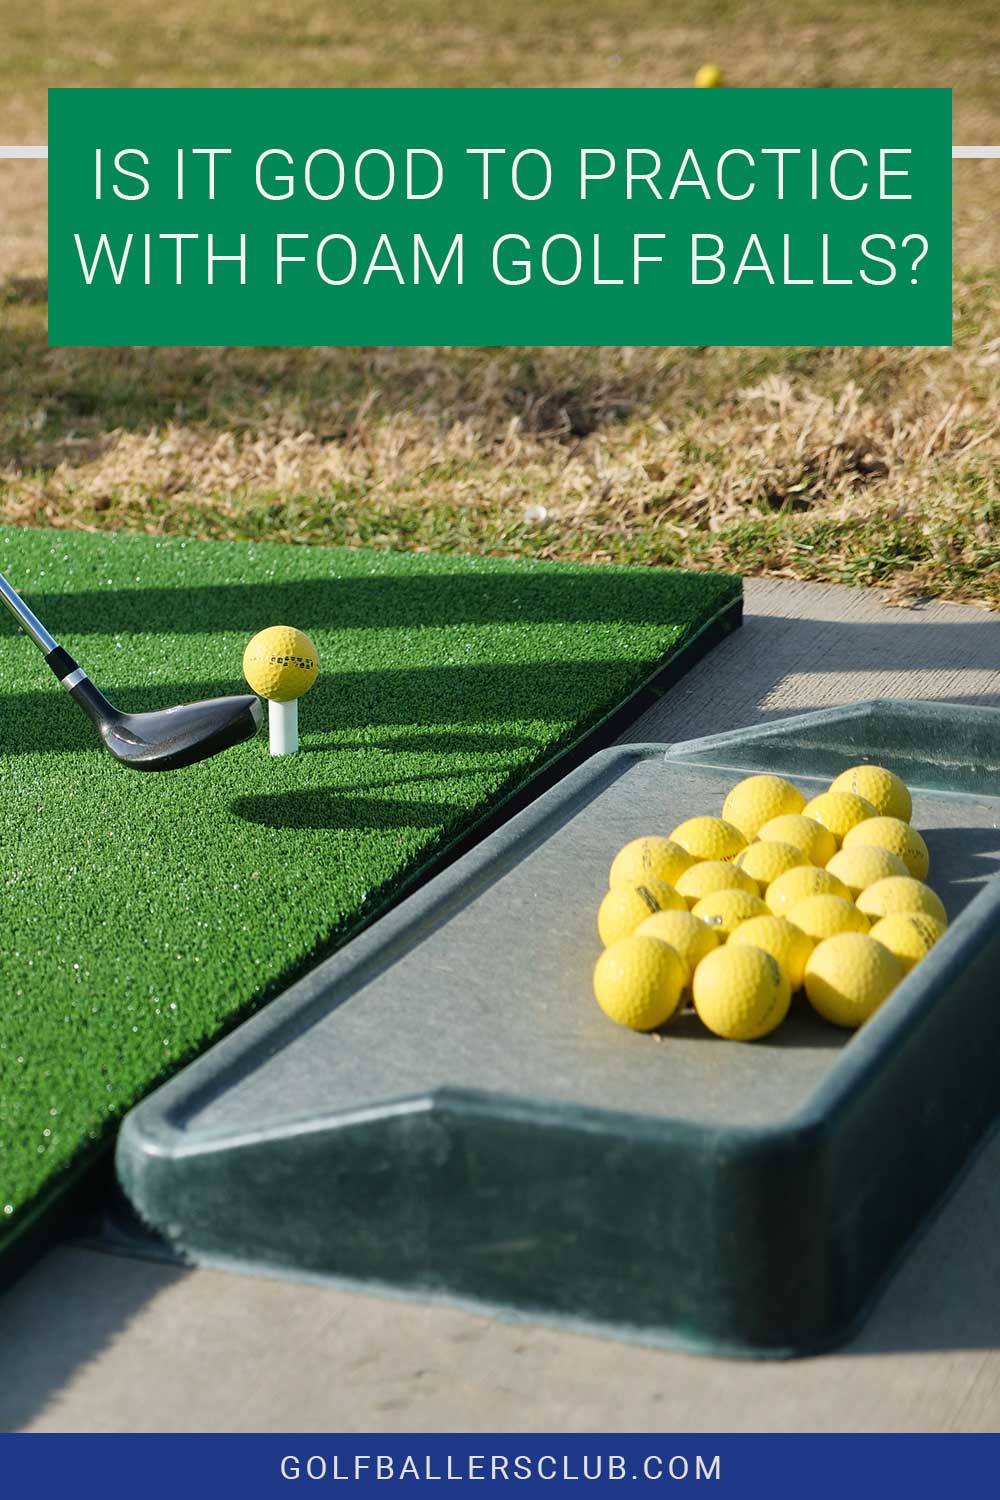 Some foam golf balls - Is It Good To Practice With these?